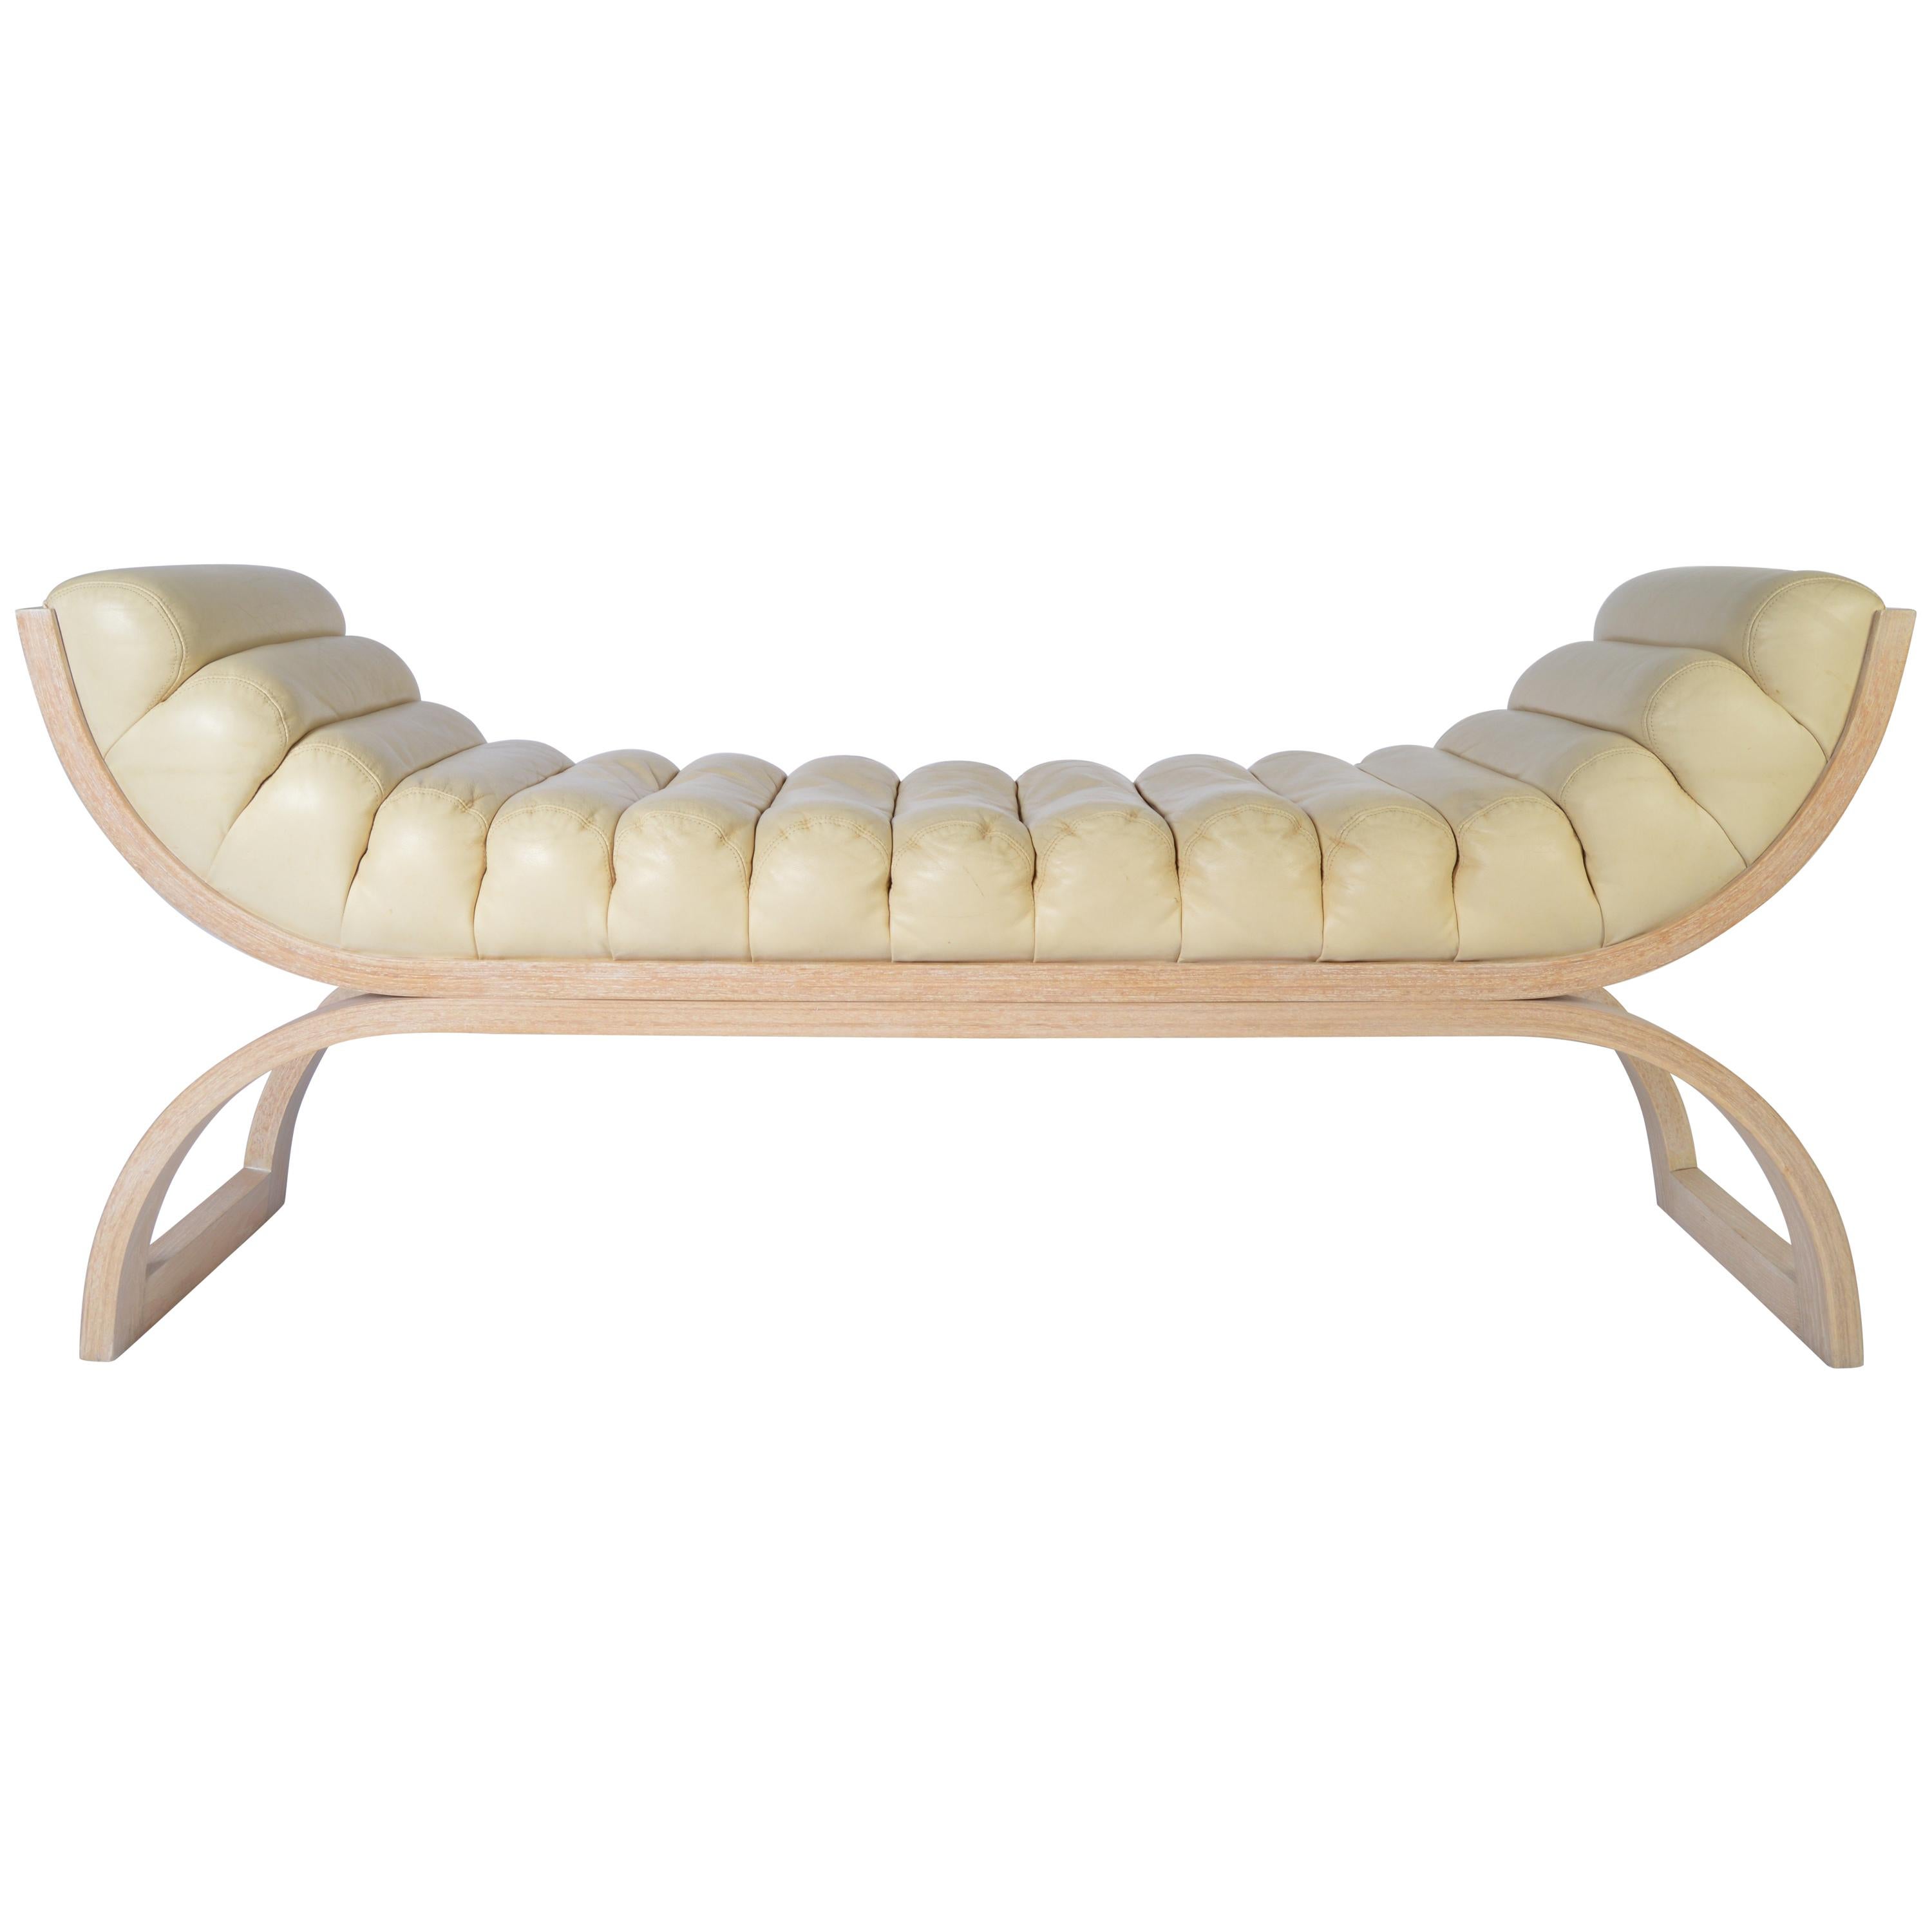 Jay Spectre for Century Furniture "Eclipse" Bench